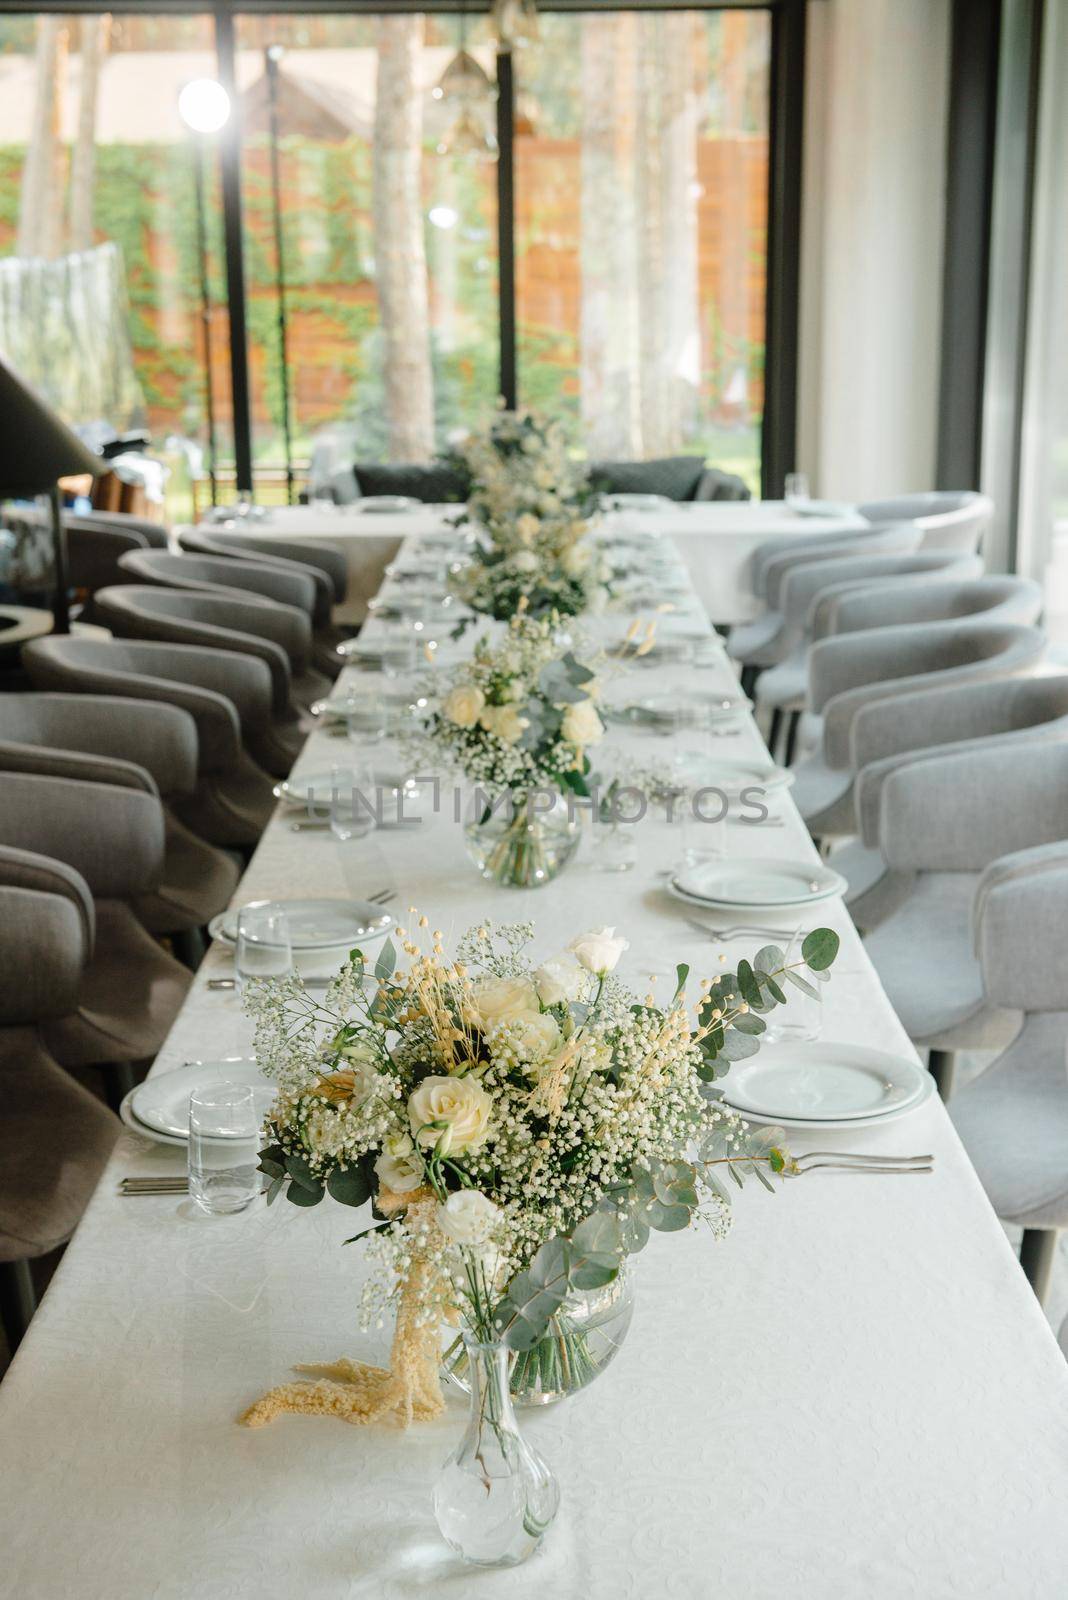 Wedding reception table in the restaurant decorated with white candles and flowers